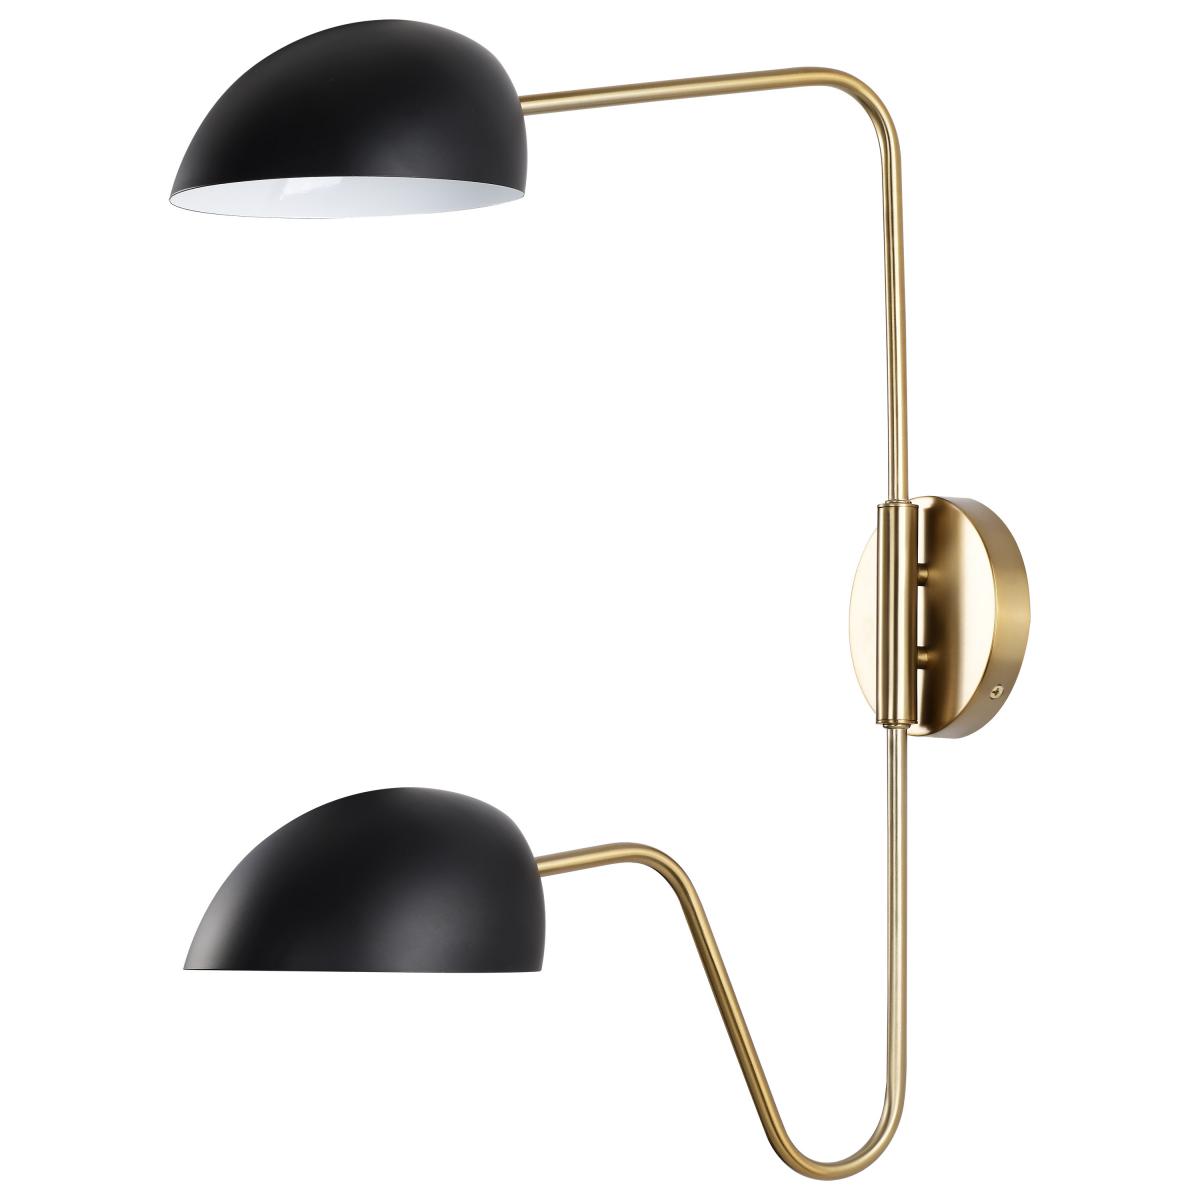 60-7393 TRILBY 2 LIGHT WALL SCONCE